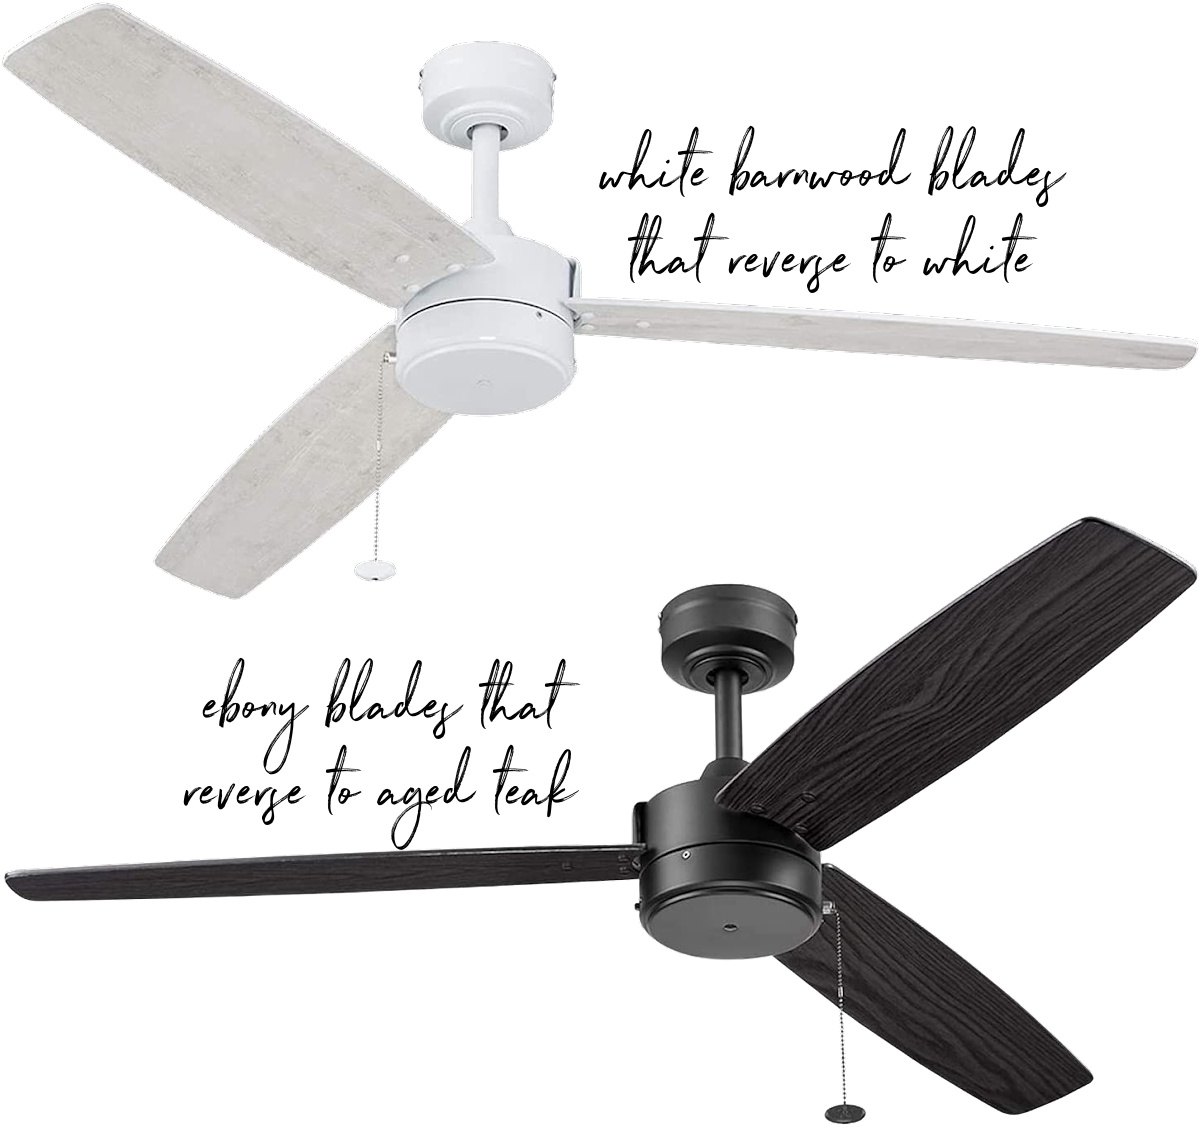 A highly rated bedroom ceiling fan at a budget price!